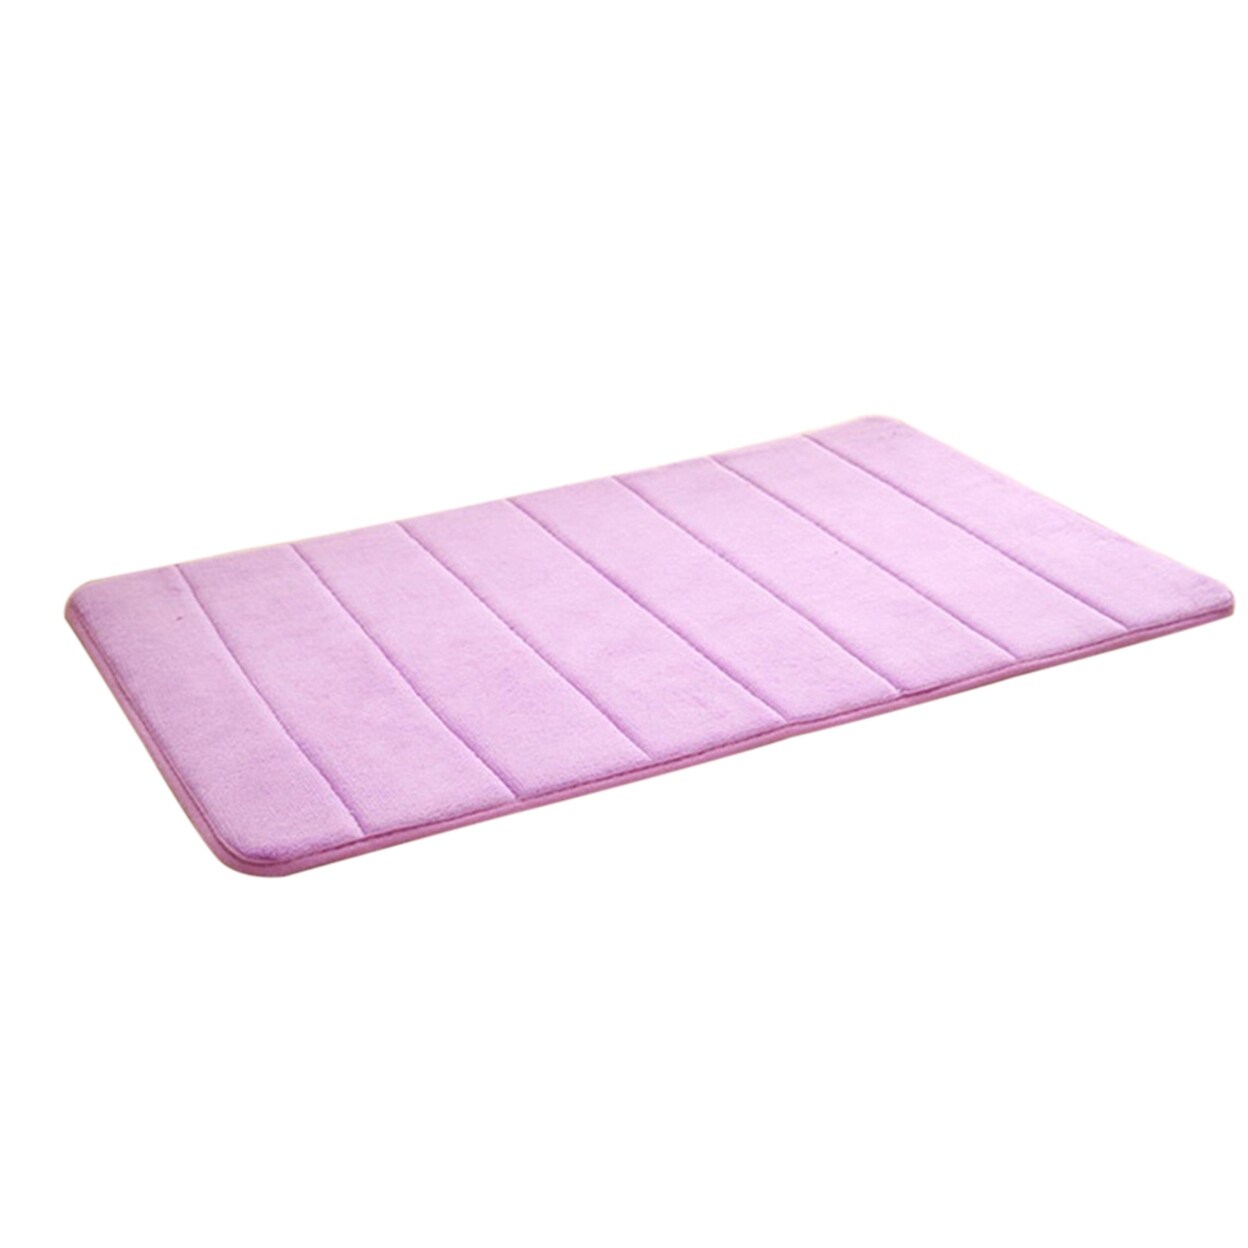 https://ak1.ostkcdn.com/images/products/is/images/direct/38a3aab68eb219441c7937b0726a7b59636d1b30/Floormat-Thick-Mildew-Resistant-Memory-Foam-Toilet-Floor-NonSlip-Rug-Floormat-For-Spa.jpg